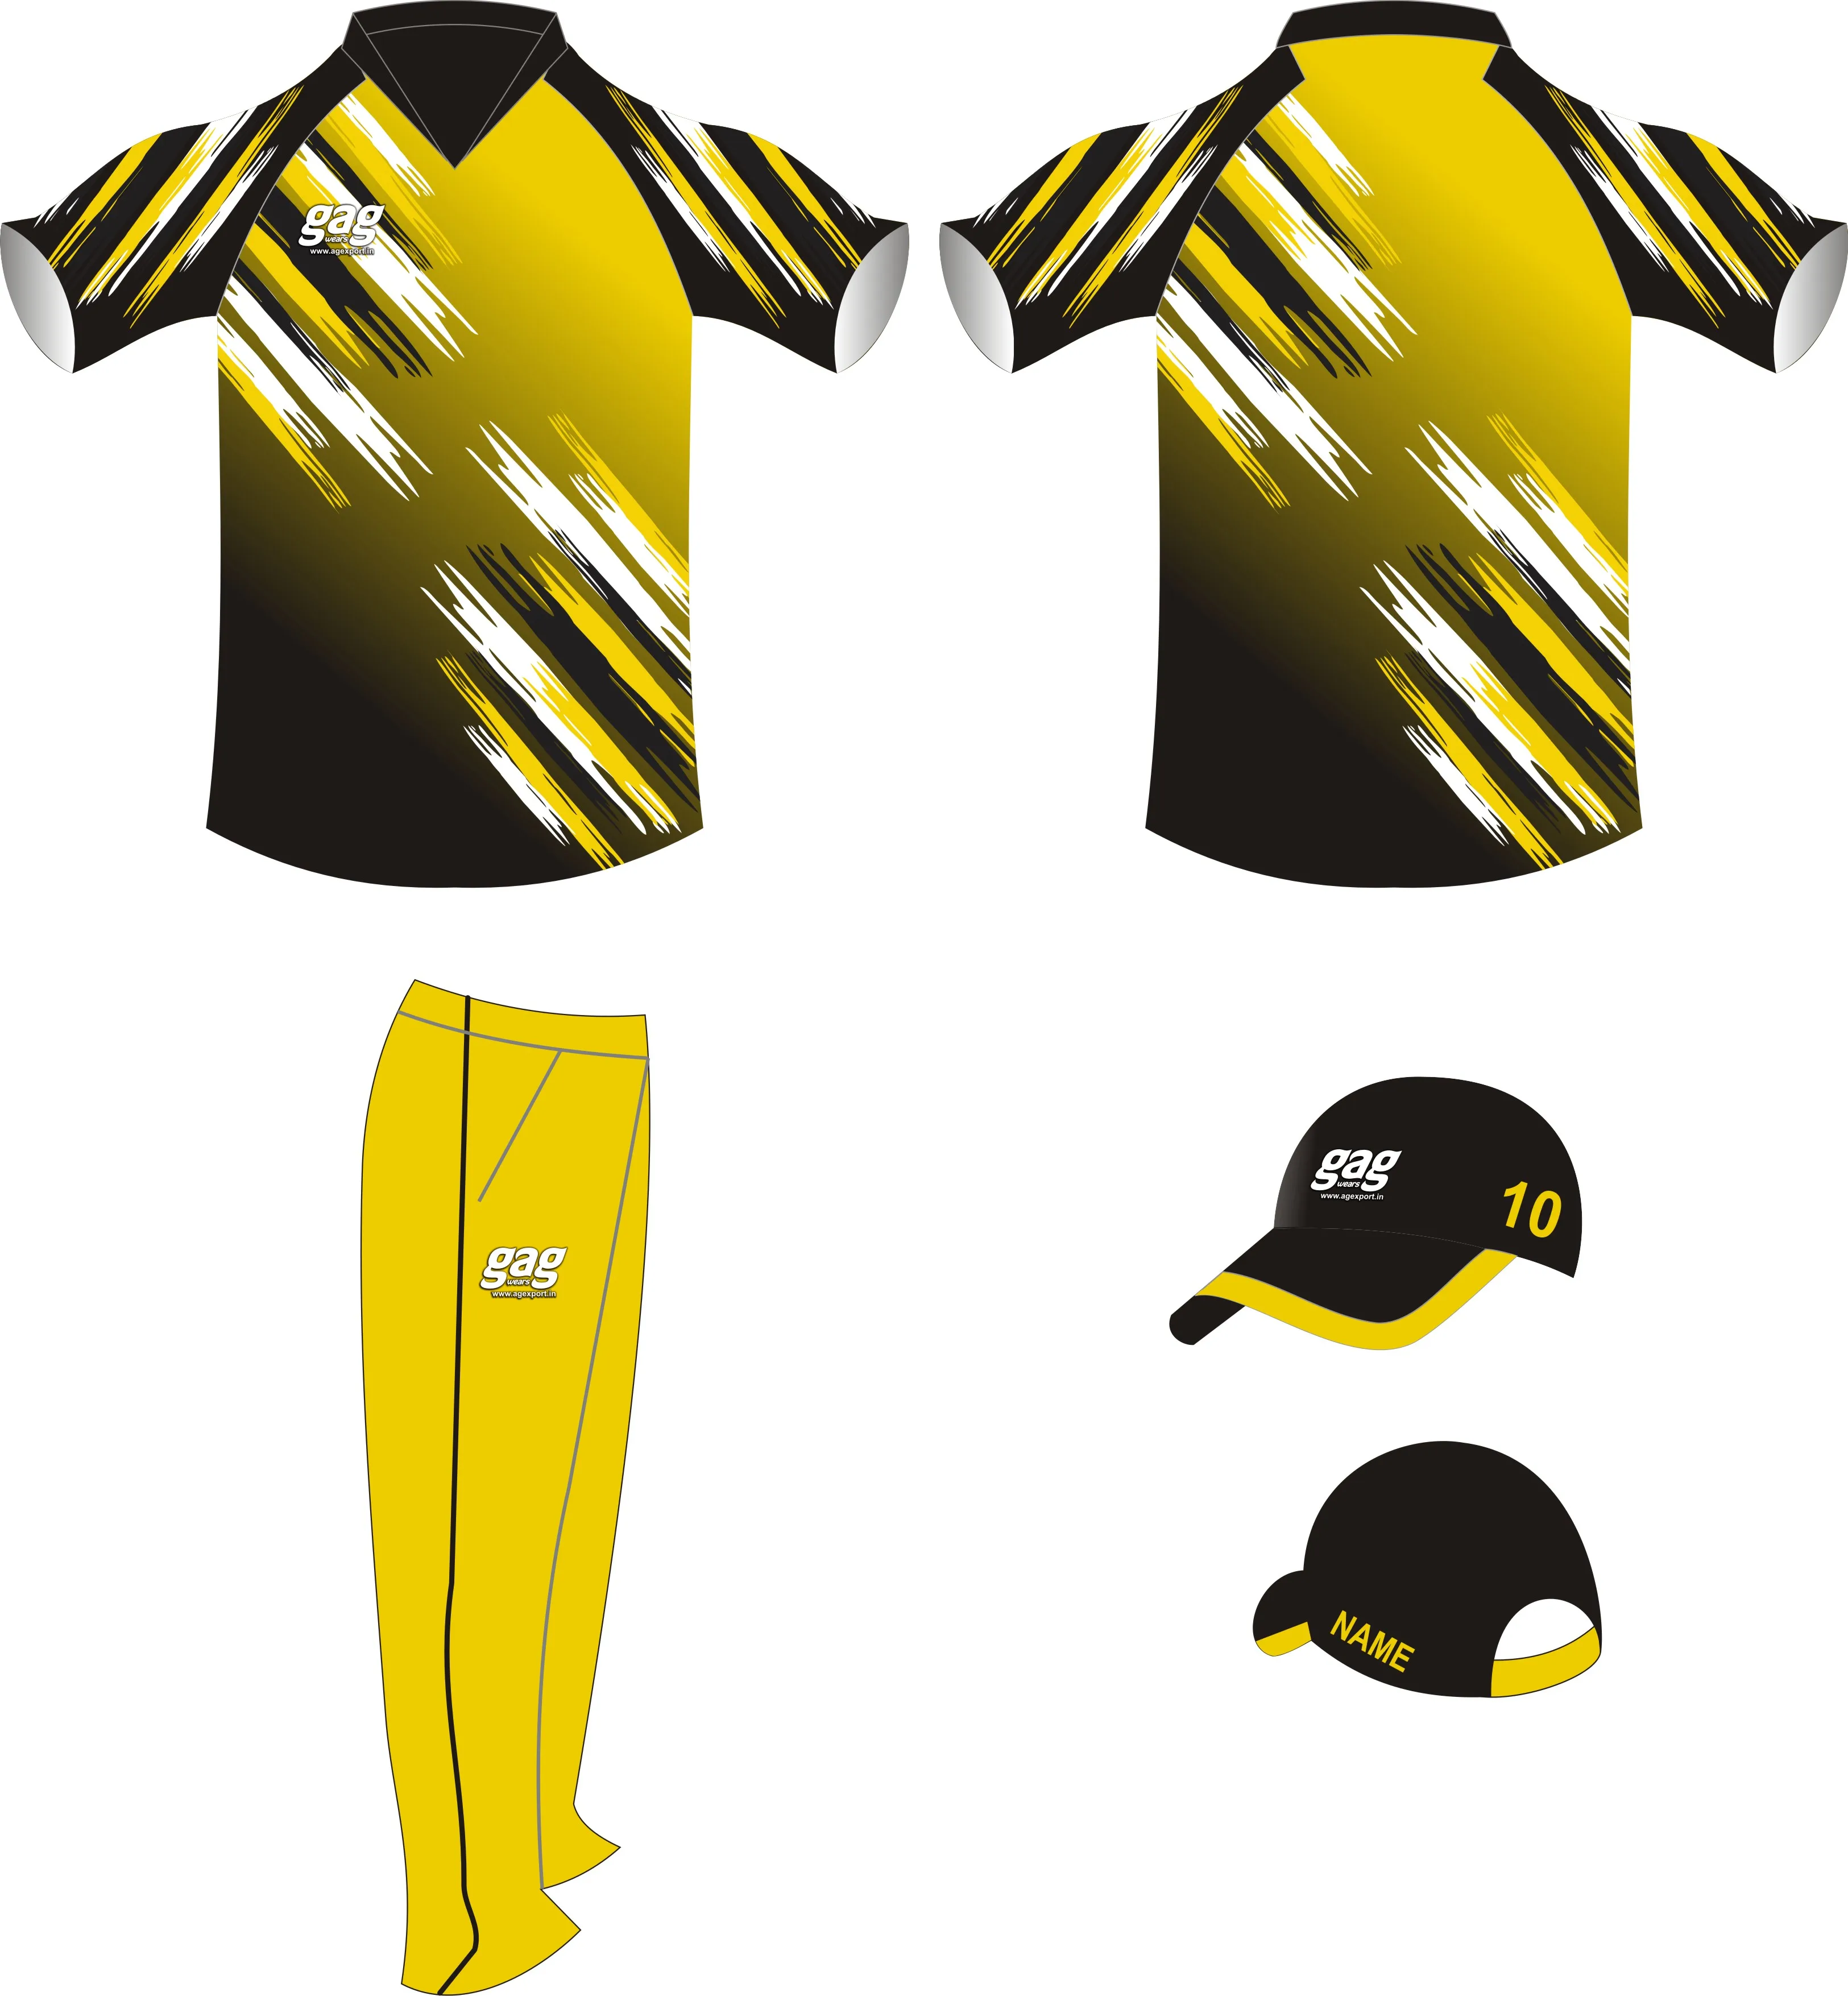 best jersey for cricket